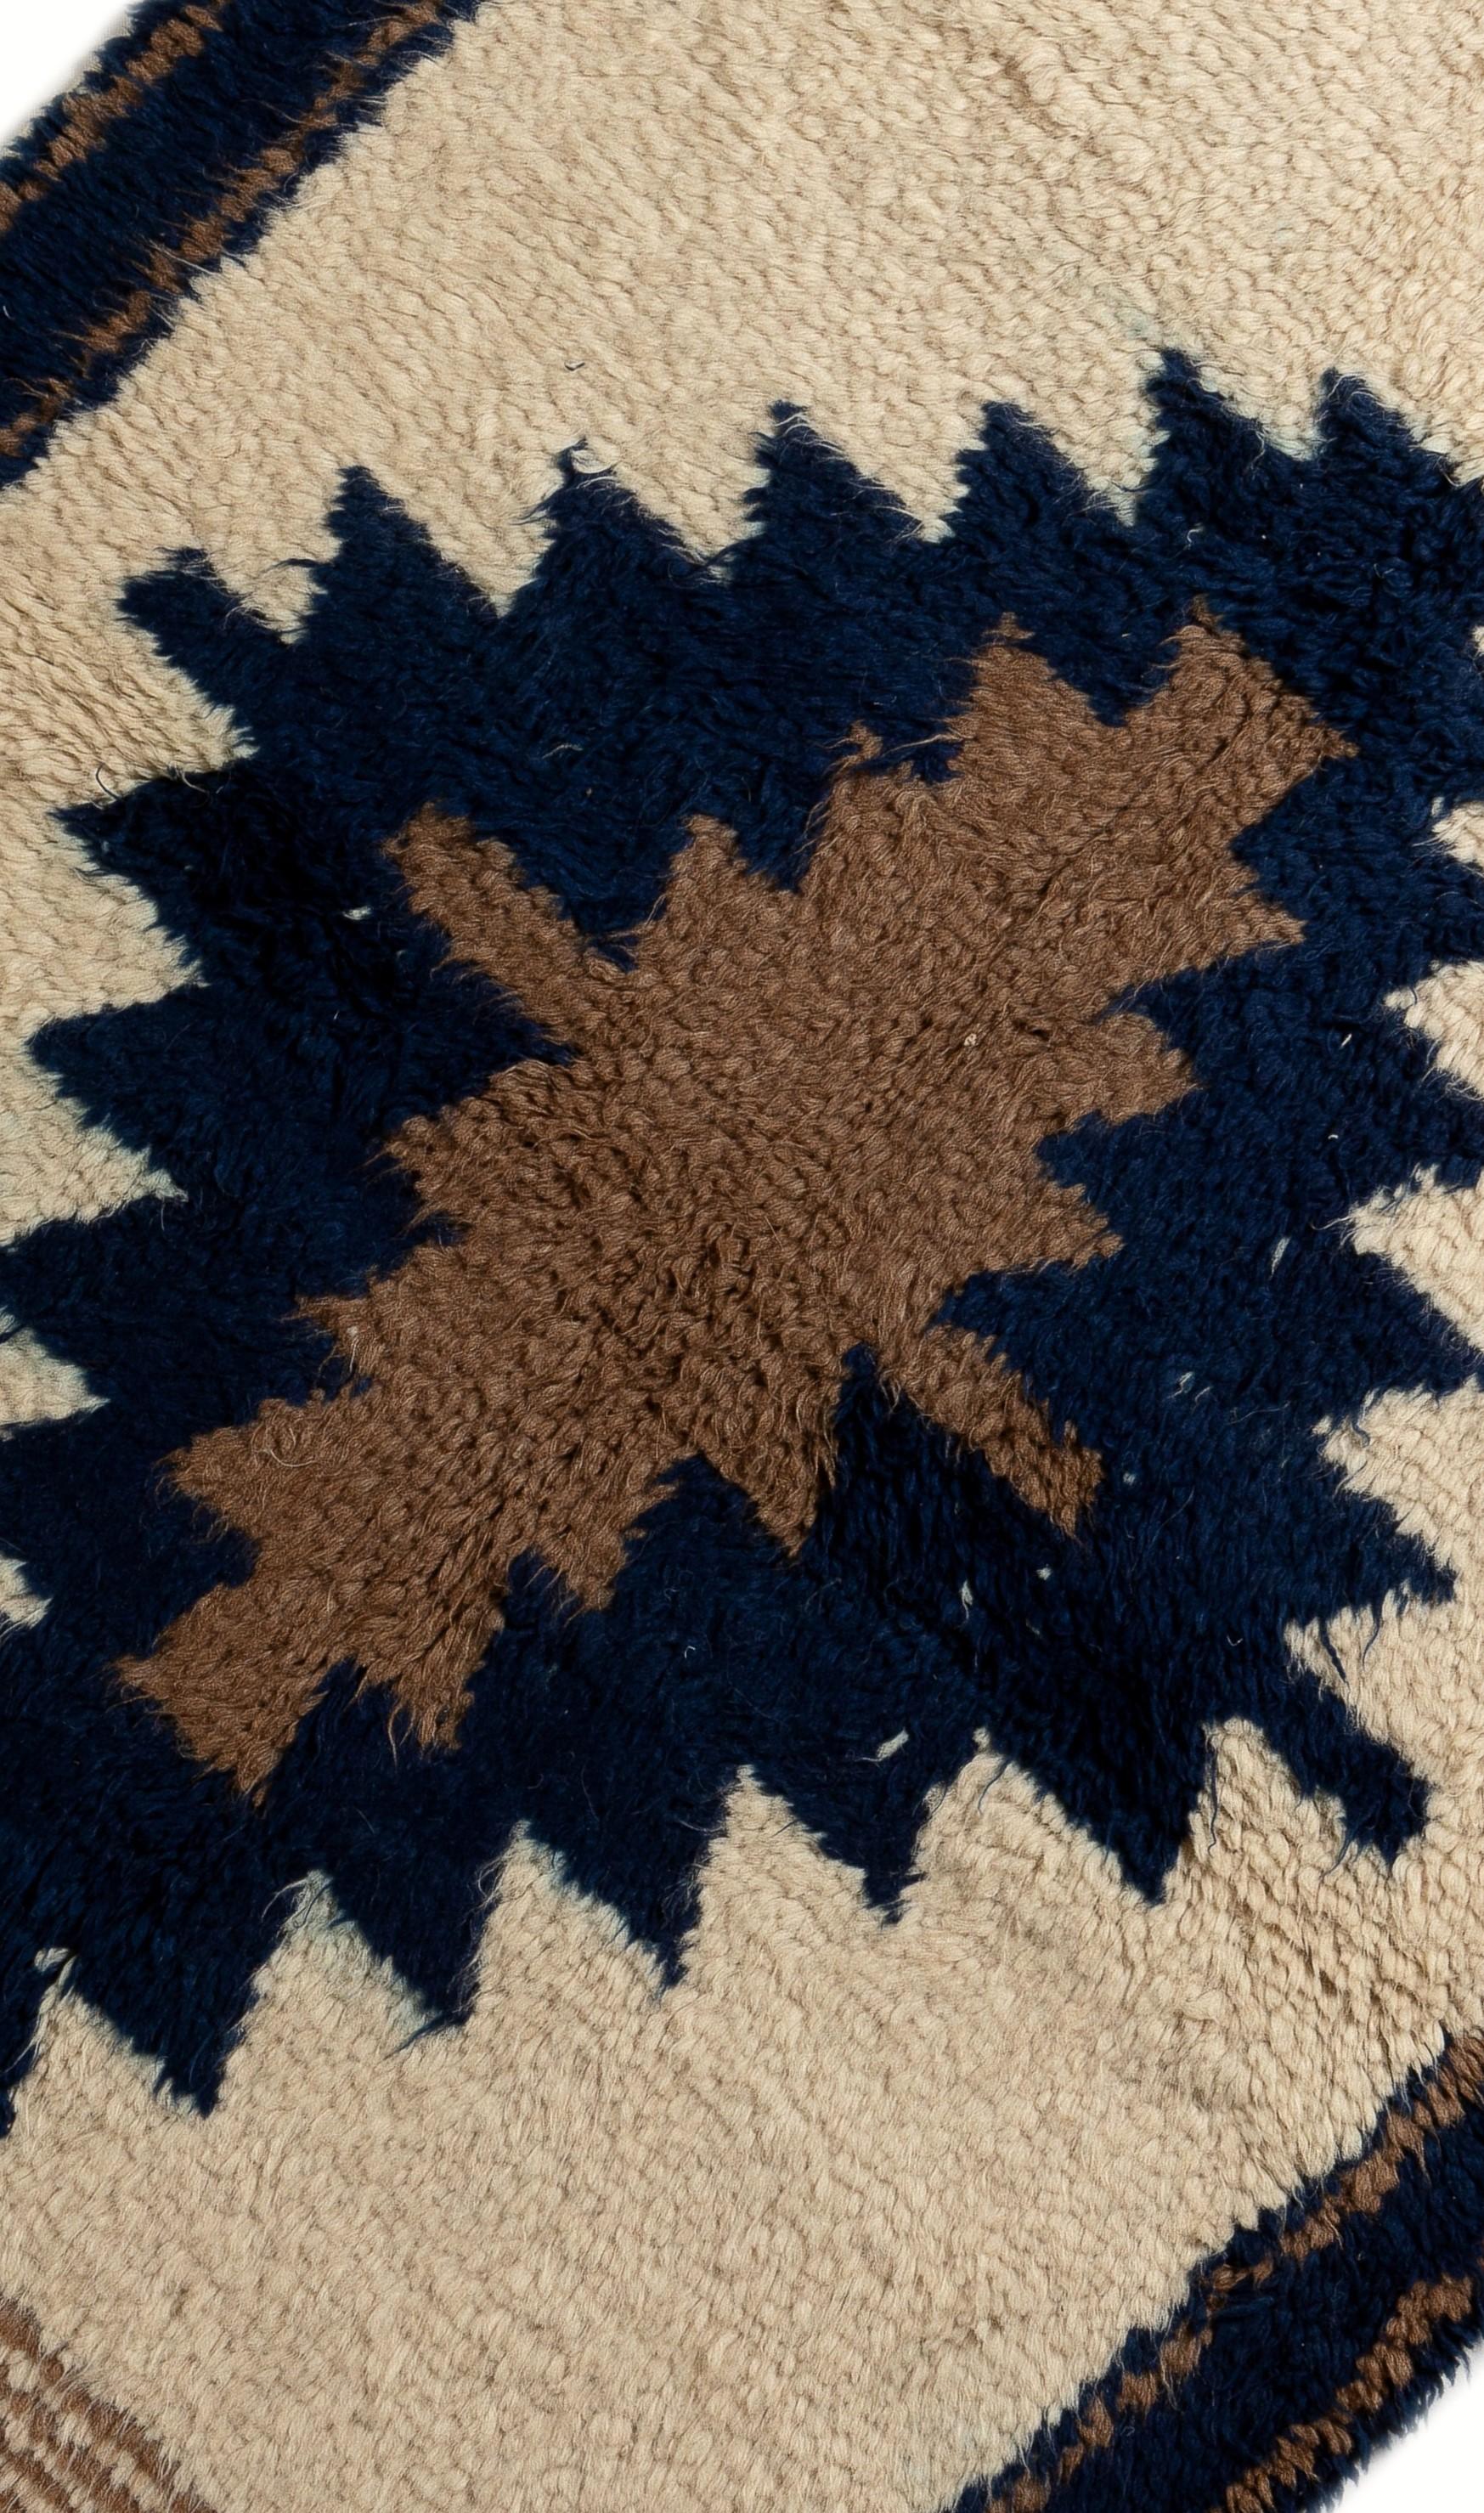 An exquisite new Turkish Tulu rug hand knotted with natural un-dyed cream and brown wool and indigo dyed blue wool. Soft, thick and comfy pile. 
A true statement piece that can easily be the focal point of any modern/contemporary interiors. 

The